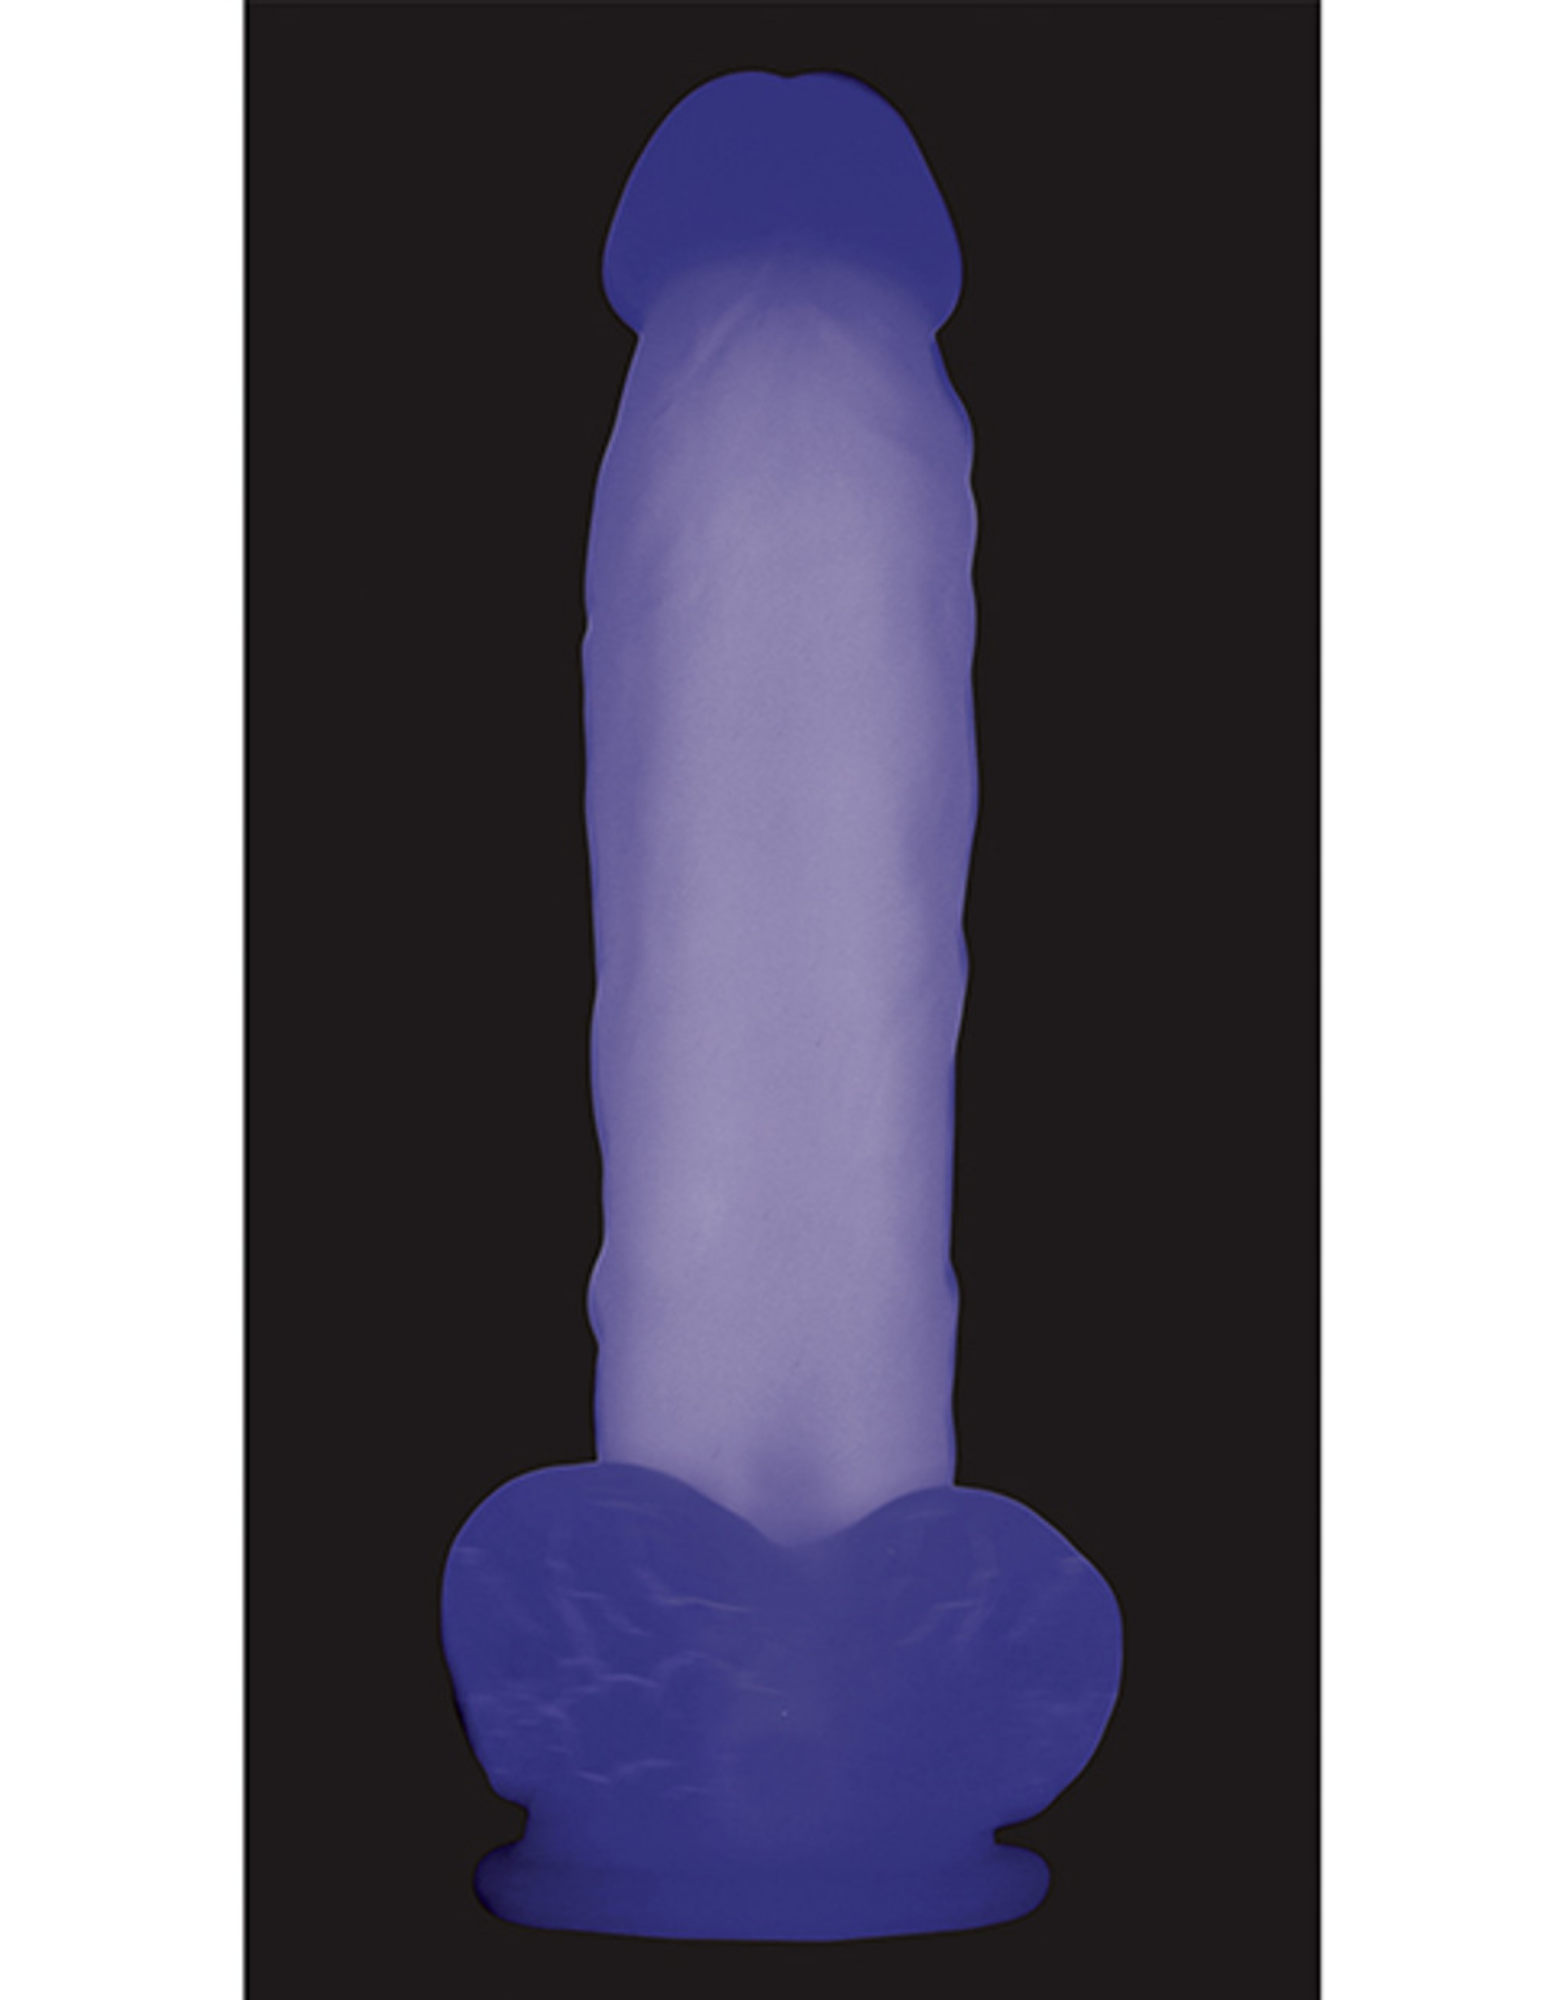 Full view of the Luminous Dildo (medium) from Evolved Novelties showing its purple glow when in the dark.